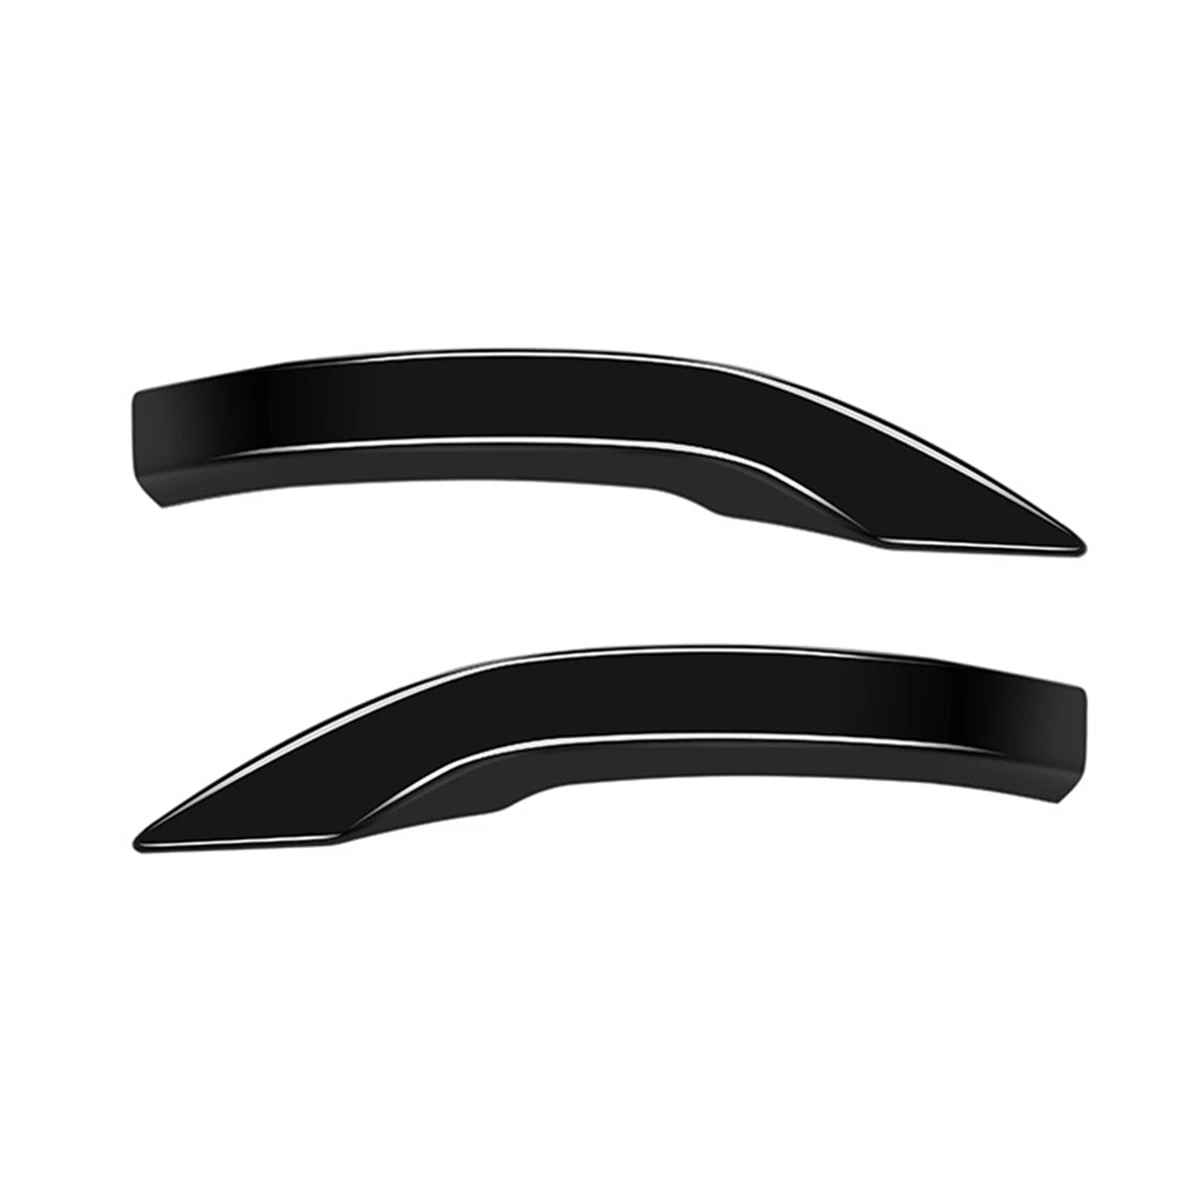 

For Honda HRV HR-V E:NS1 LHD 2021 2022 Accessories Rear Side View Rearview Mirror Cover Trim Bright Black